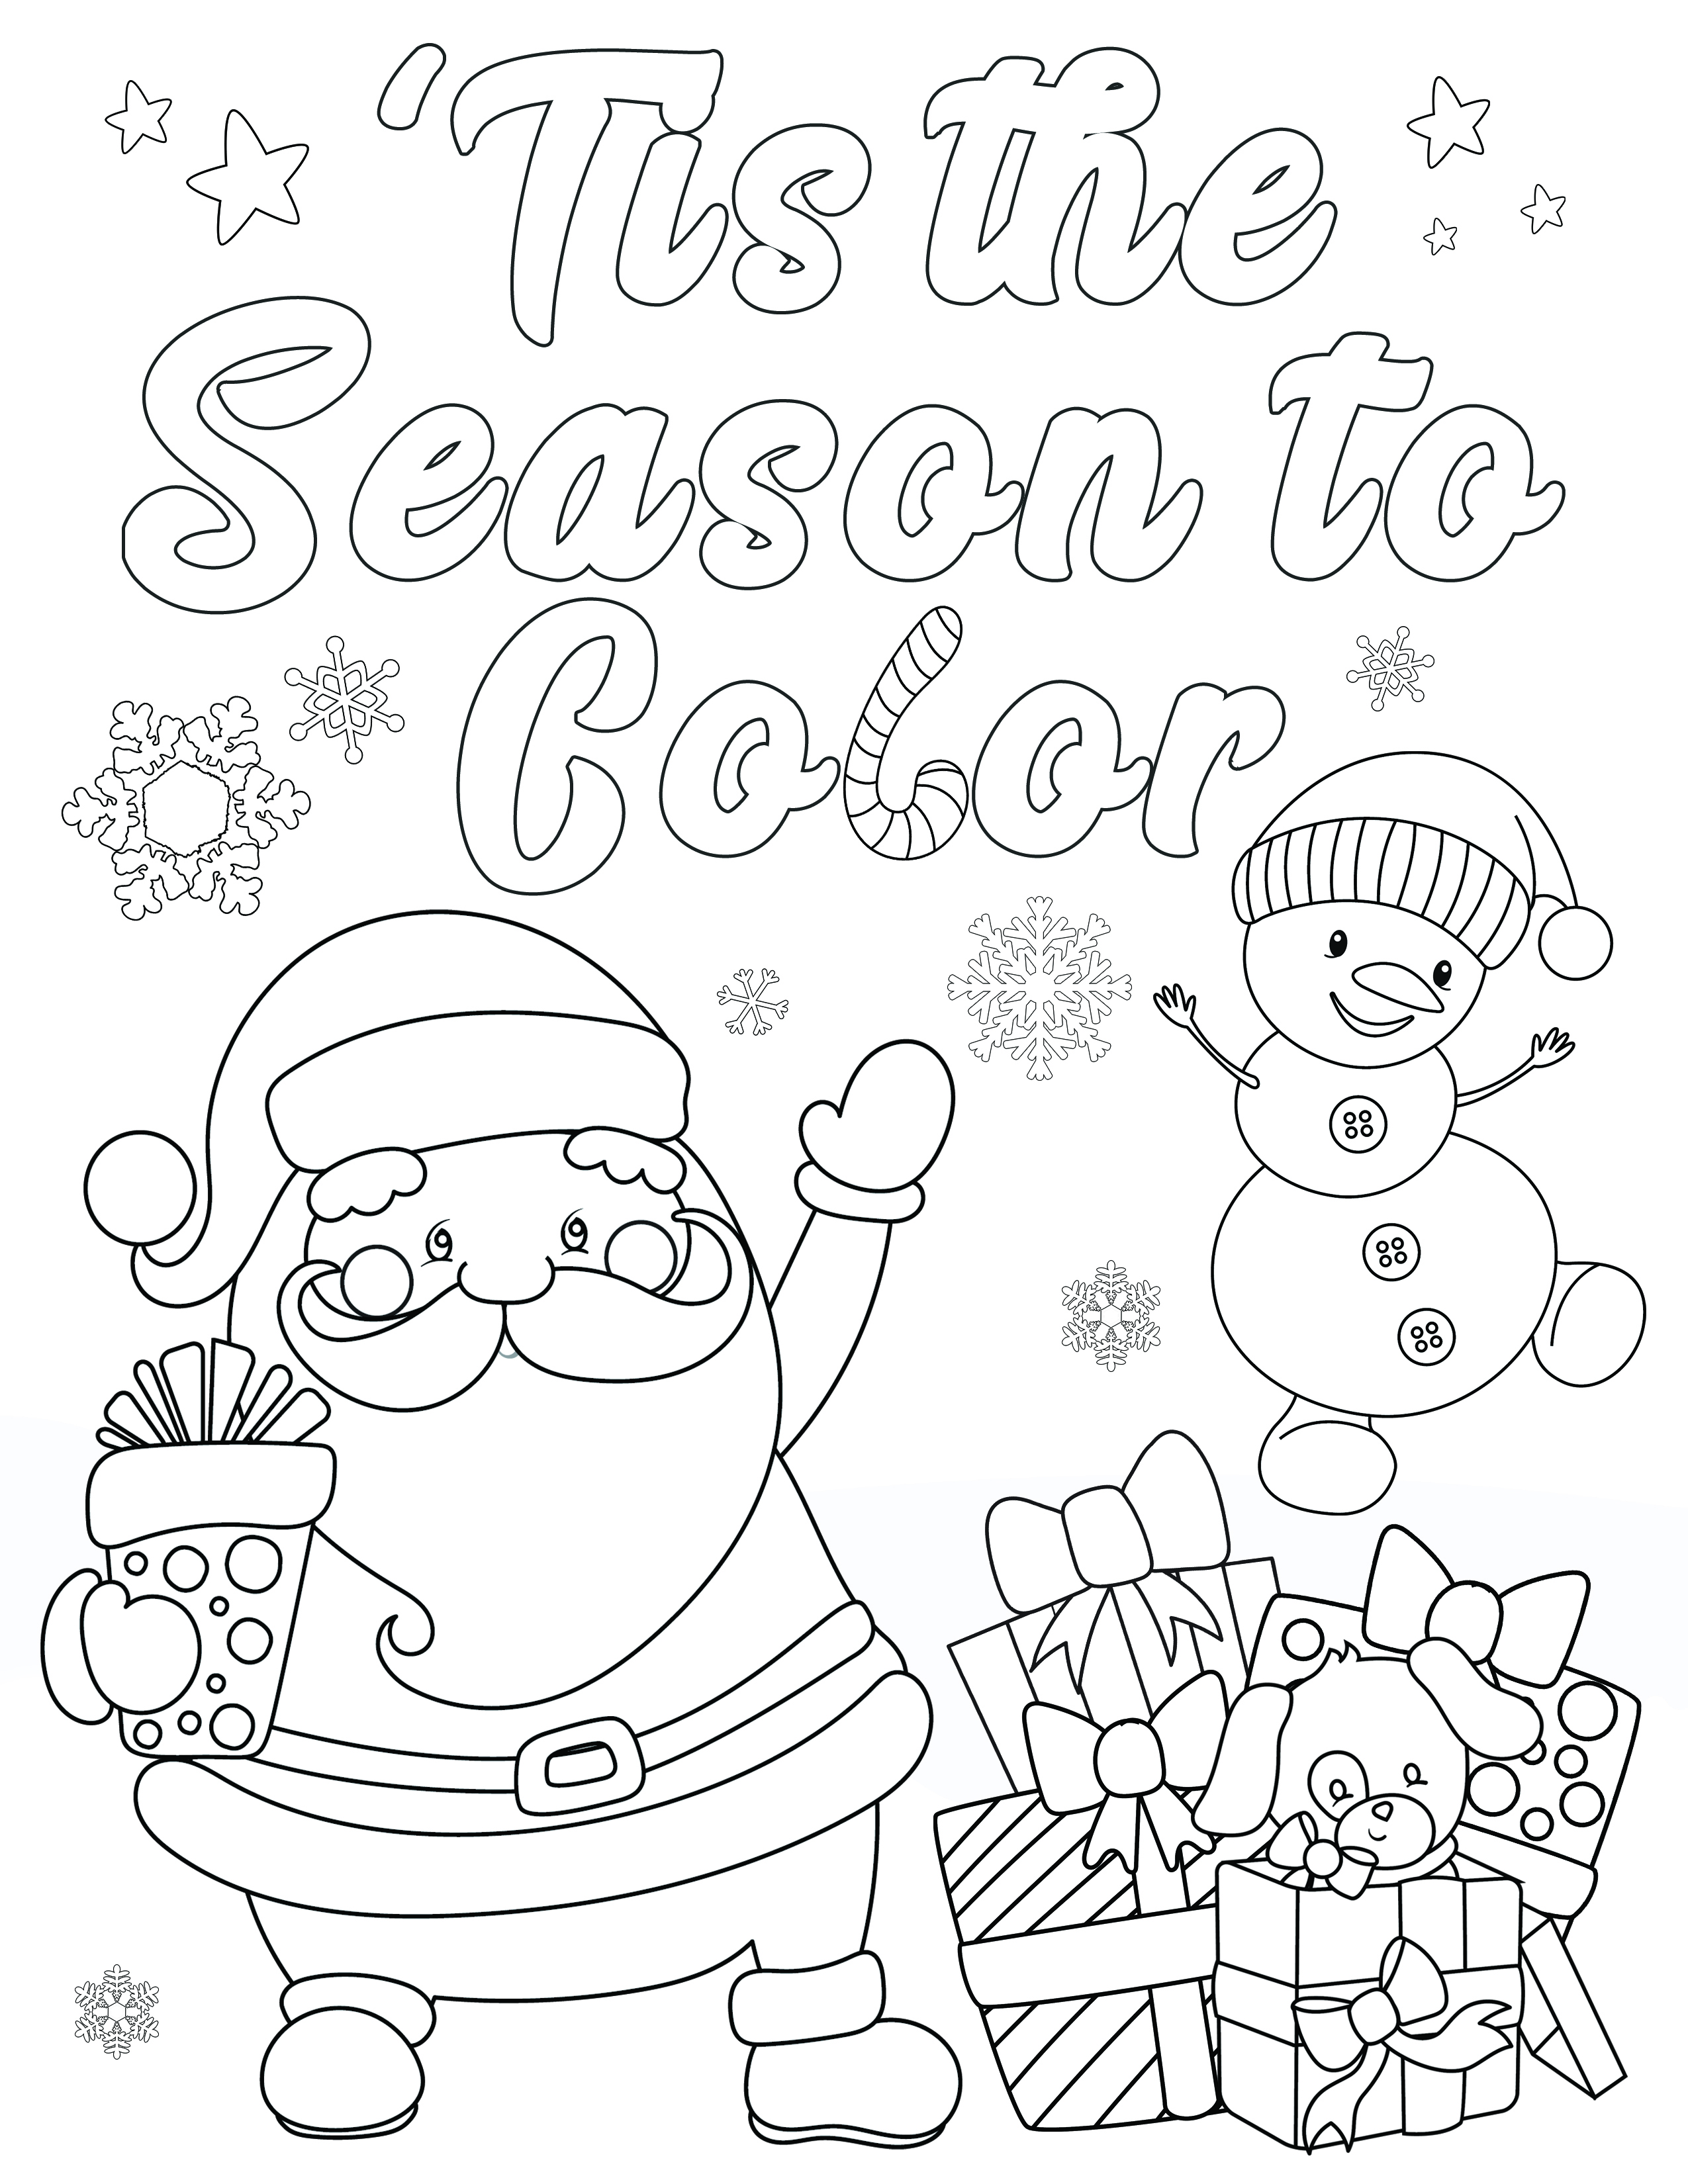 Download FREE Christmas Coloring Page - 'Tis the Season to Color ...